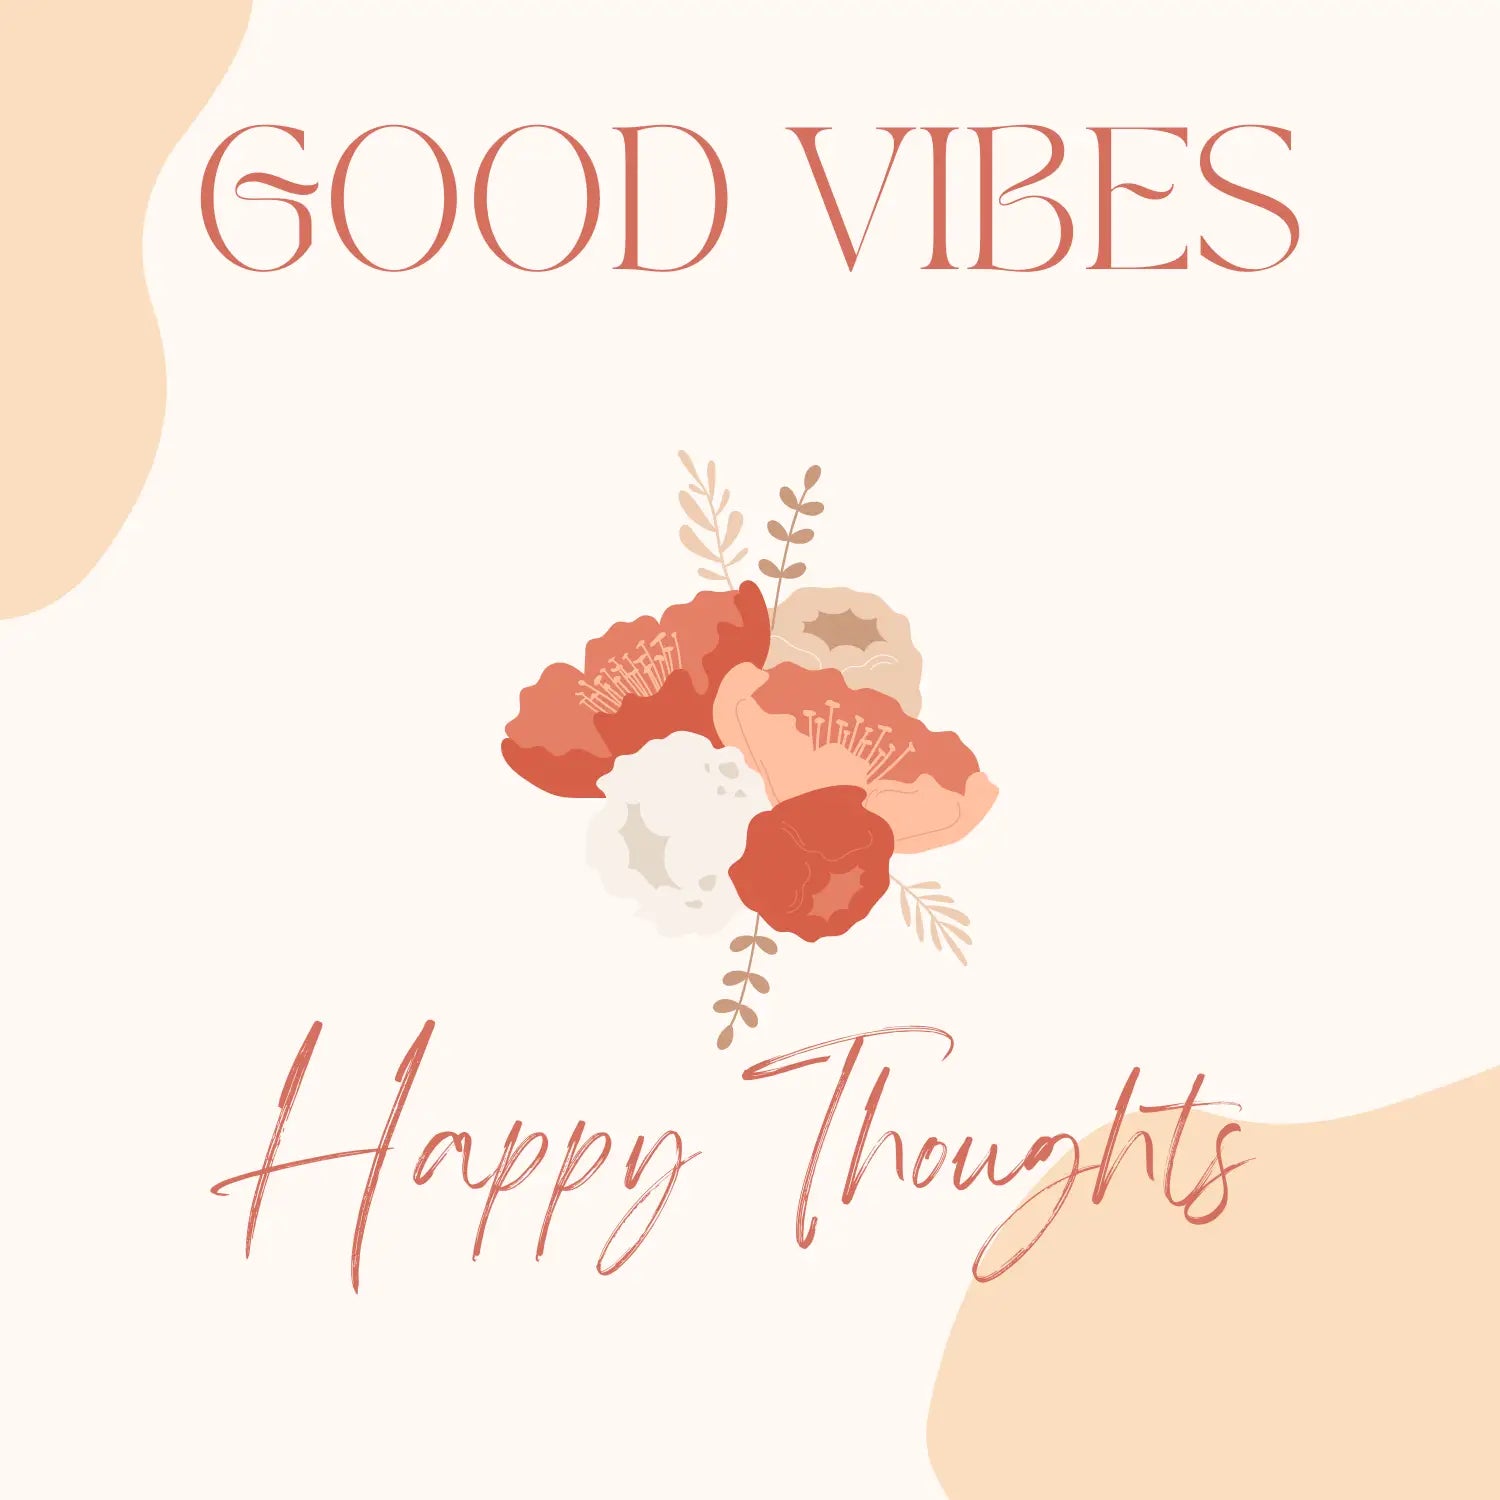 Good Vibes and Happy Thoughts